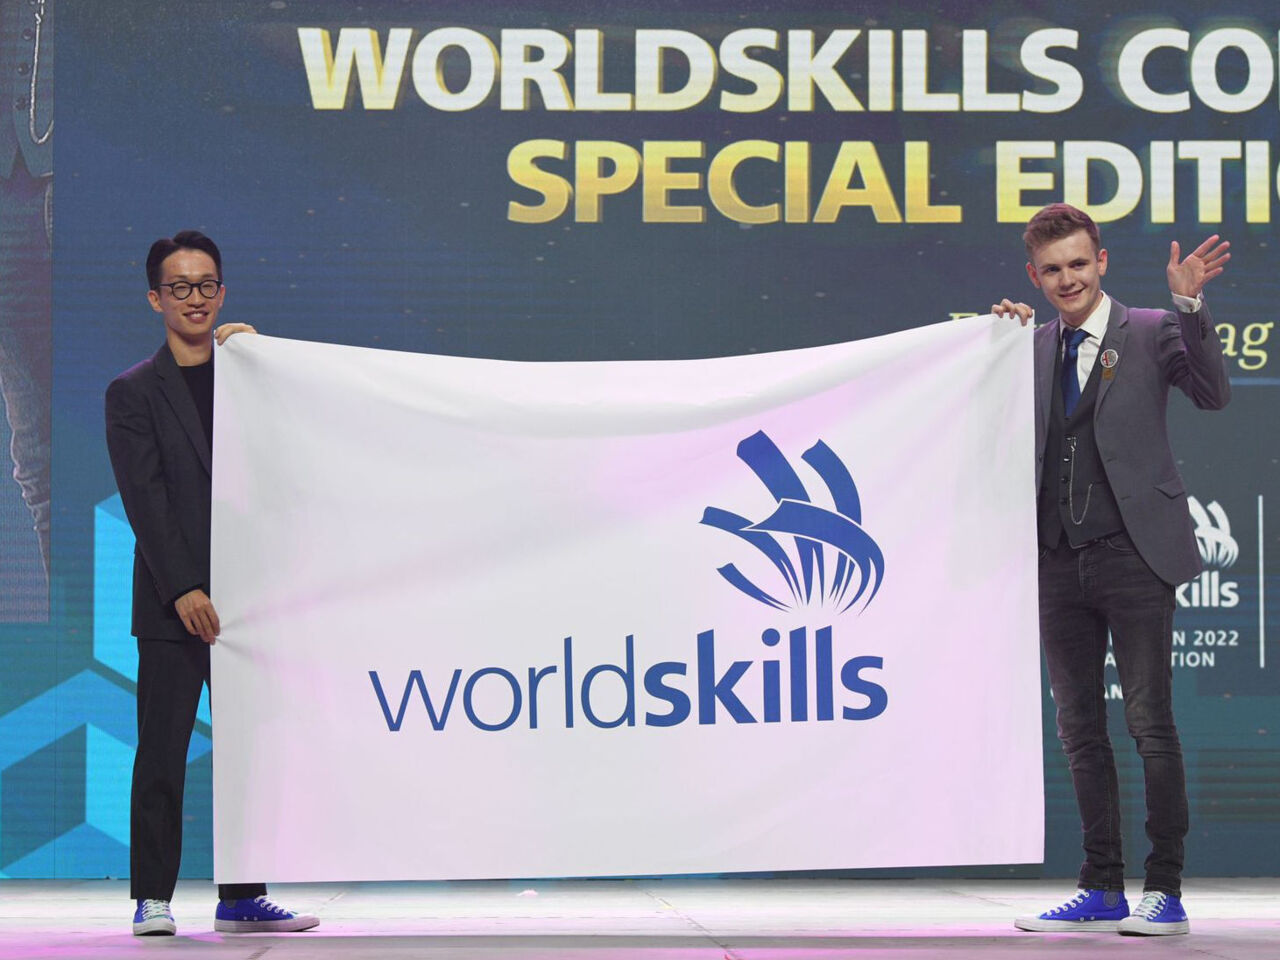 Lee Hee Dong and Daniel McCabe from the WorldSkills Champions Trust on stage at WorldSkills Competition 2022 Special Edition in Goyang, Korea in October 2022.
